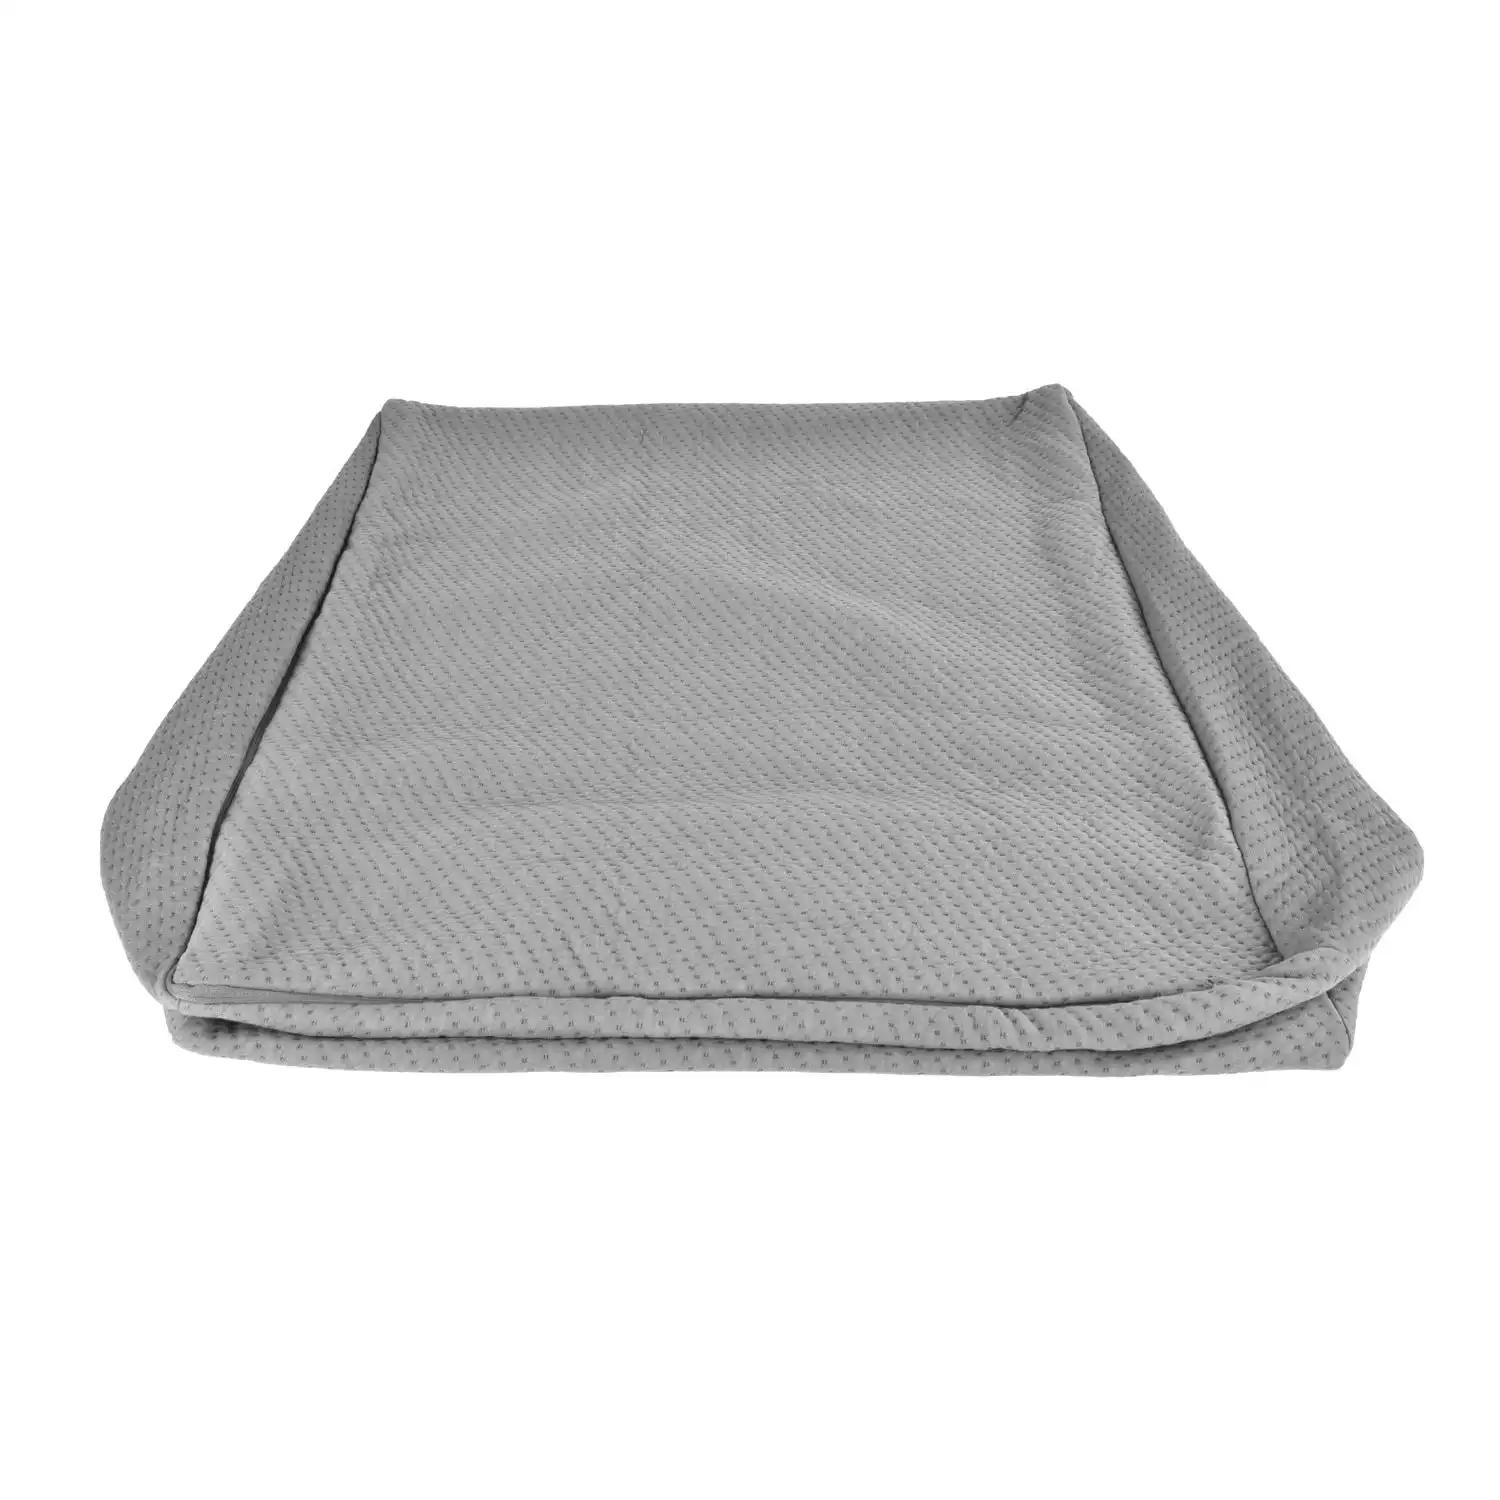 Elevating Leg Wedge Pillow Replace Cover Only